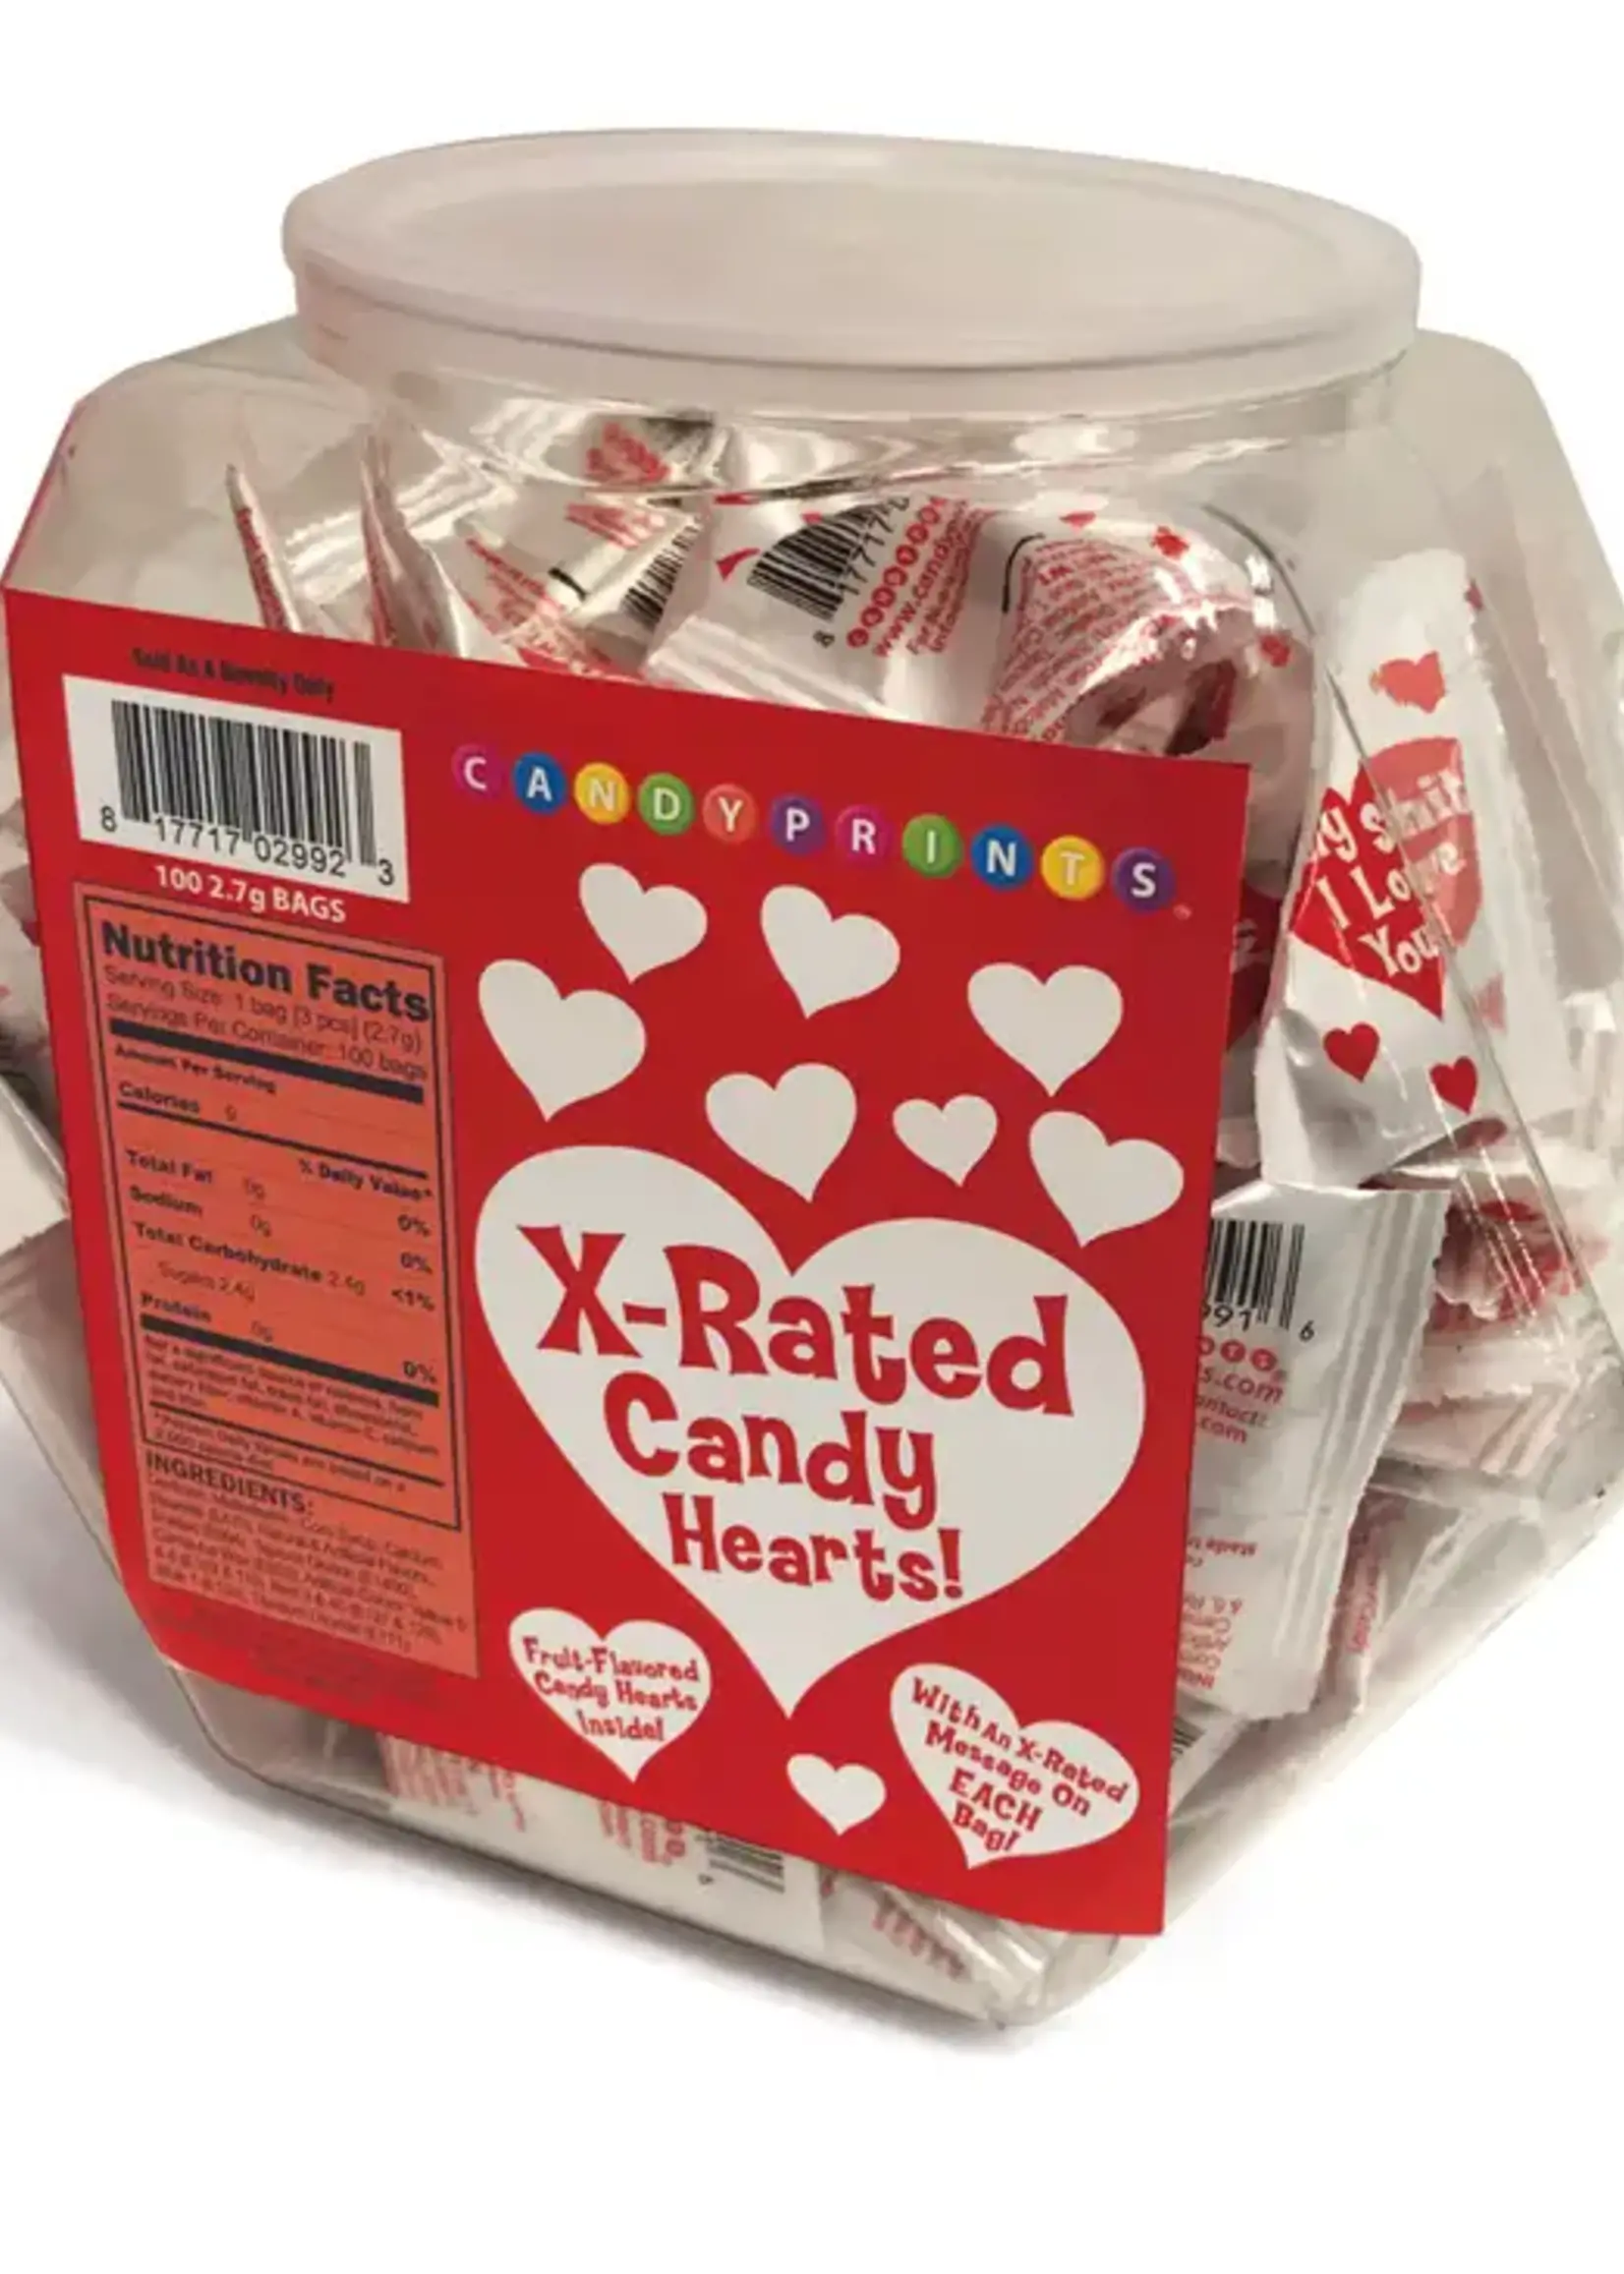 LG X-Rated Valentine's Candy Message (Fishbowl)